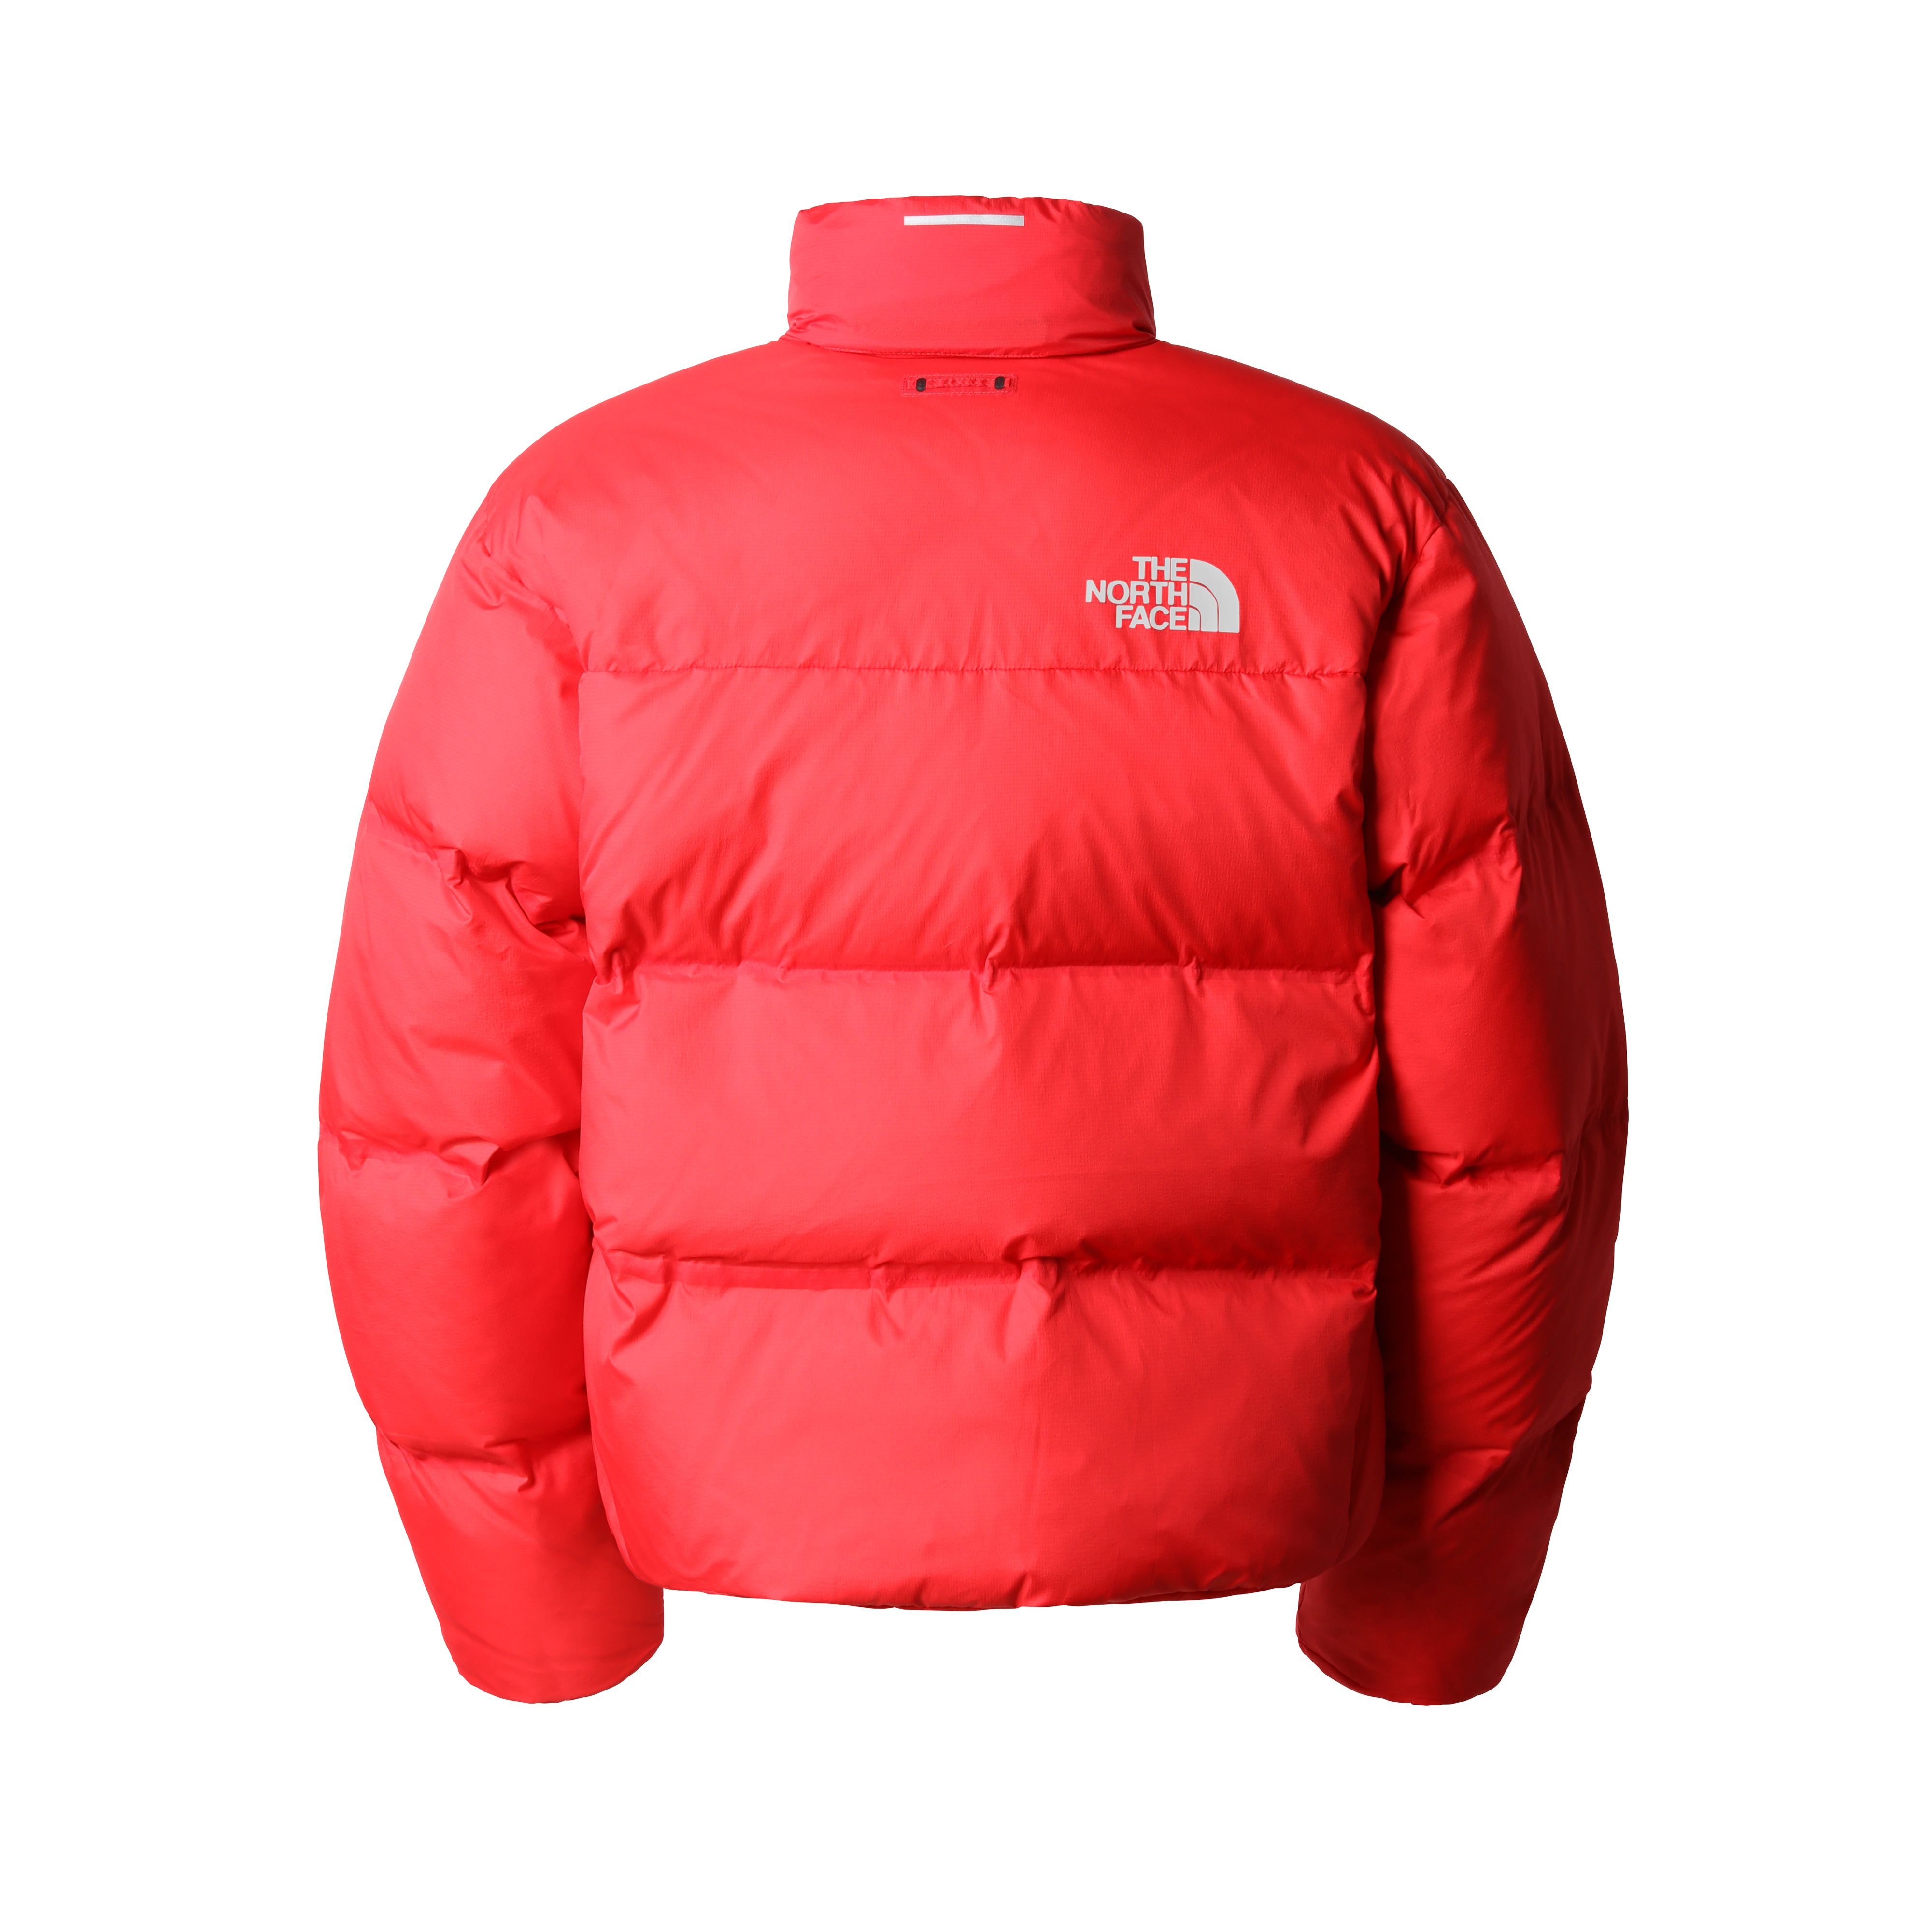 The North Face - Men’s RMST Nuptse Jacket - (Red)